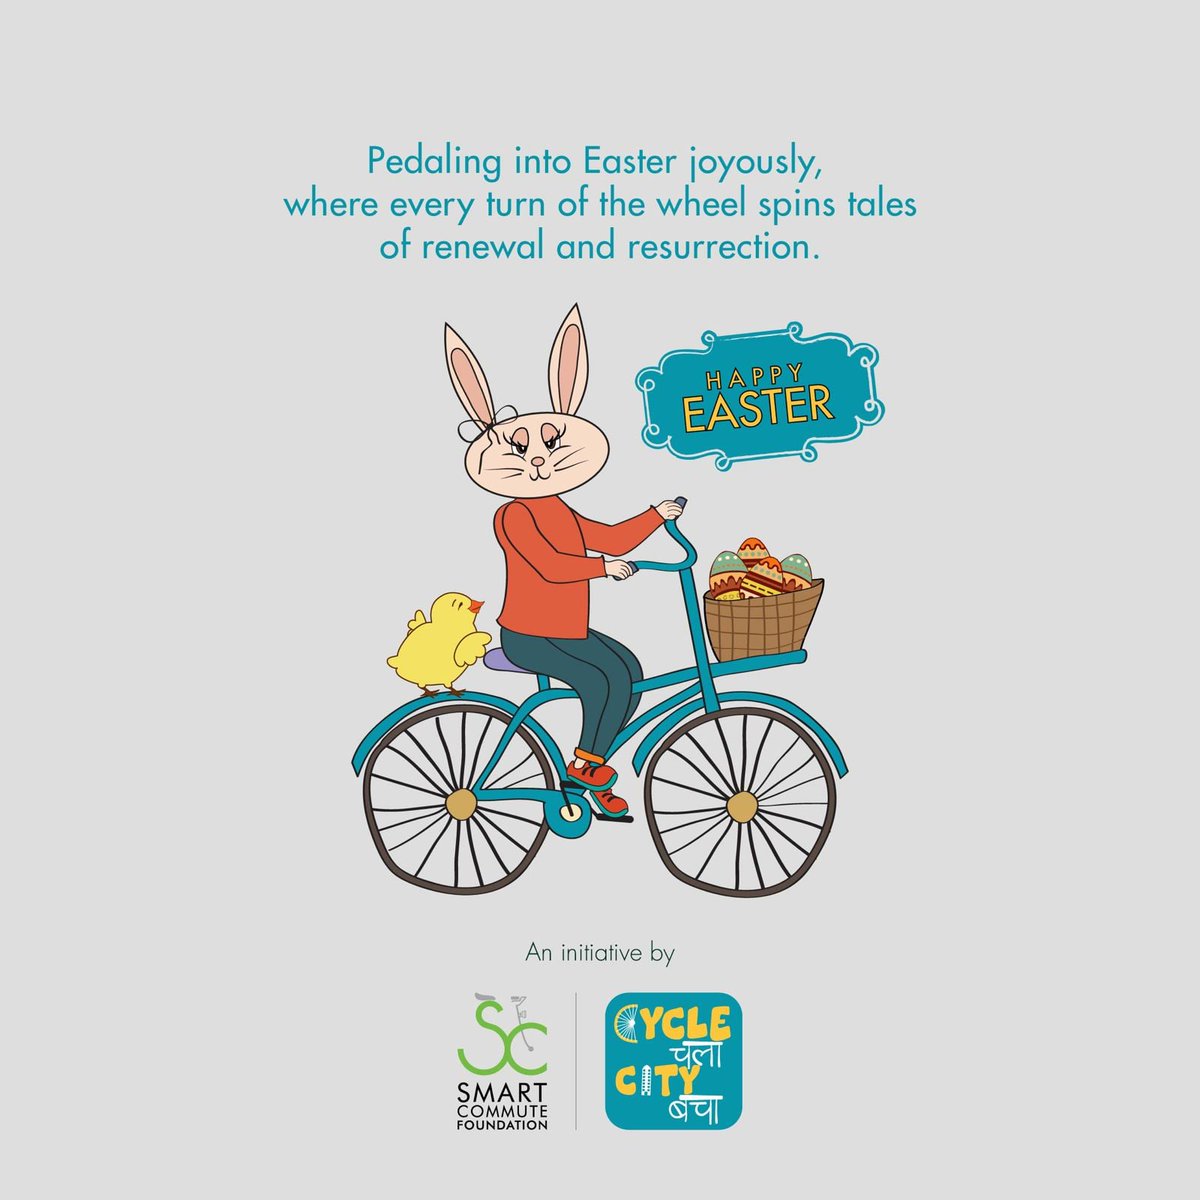 Wishing you an egg-ceptionally joyful Easter filled with love, laughter, and blessings! 🚲💕 @CycleChalaCityB